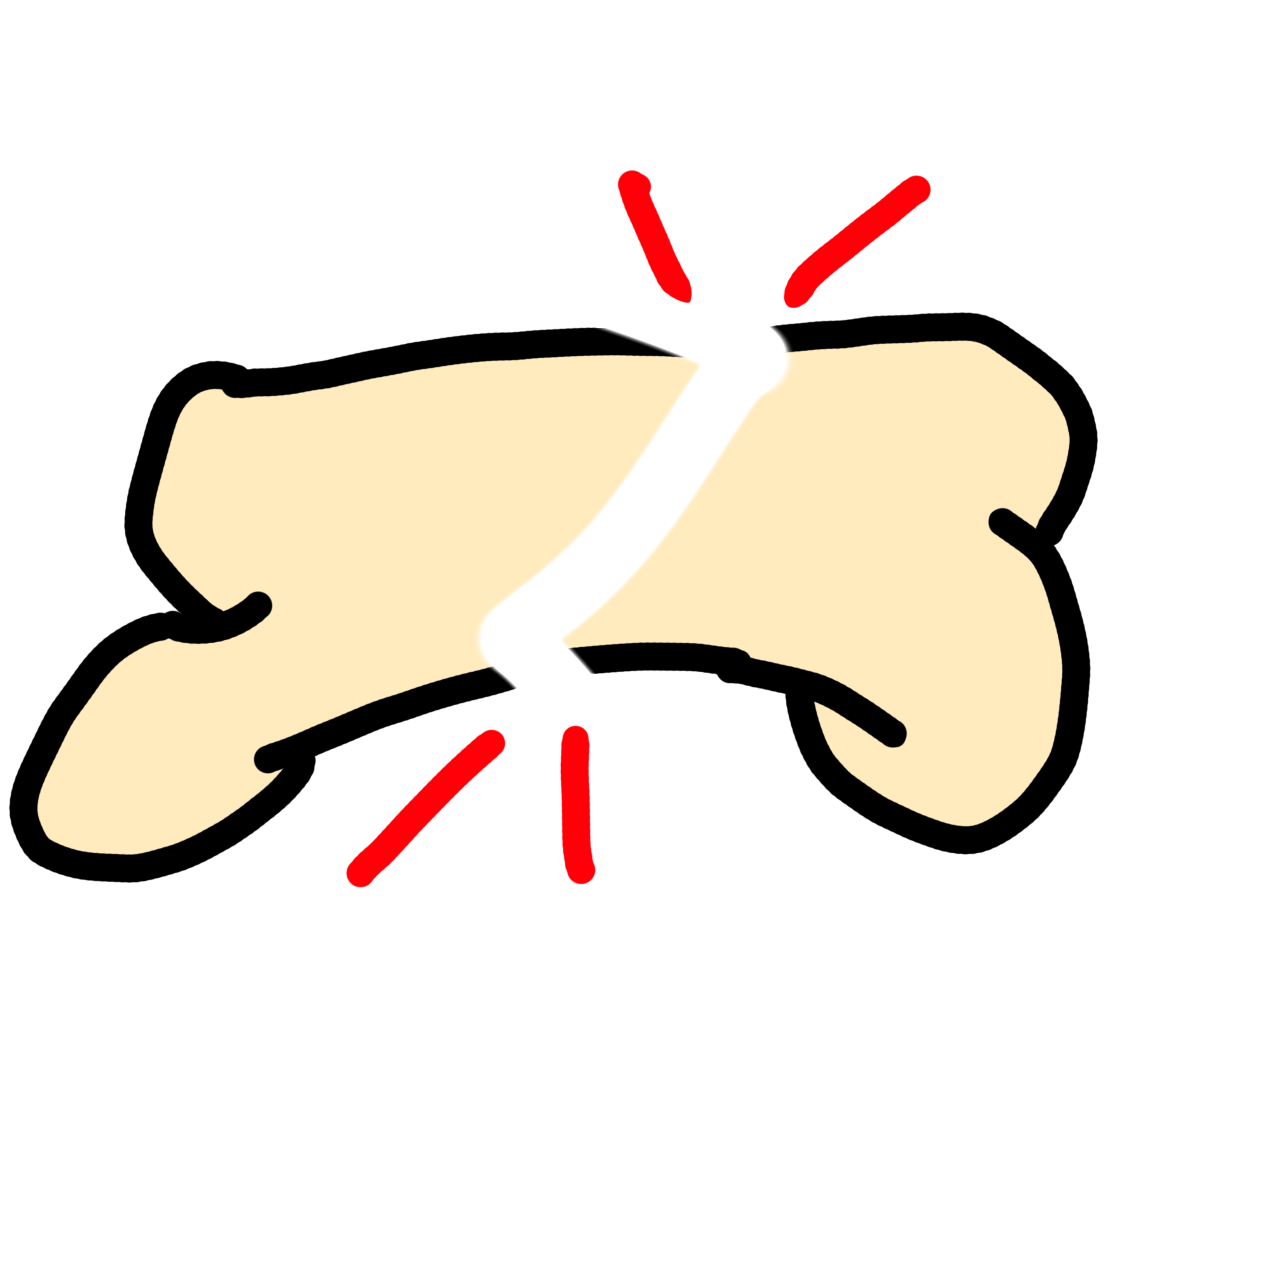  an off white bone with a jagged gap between the two halves of it. There are red emphasis or pain lines around the break.